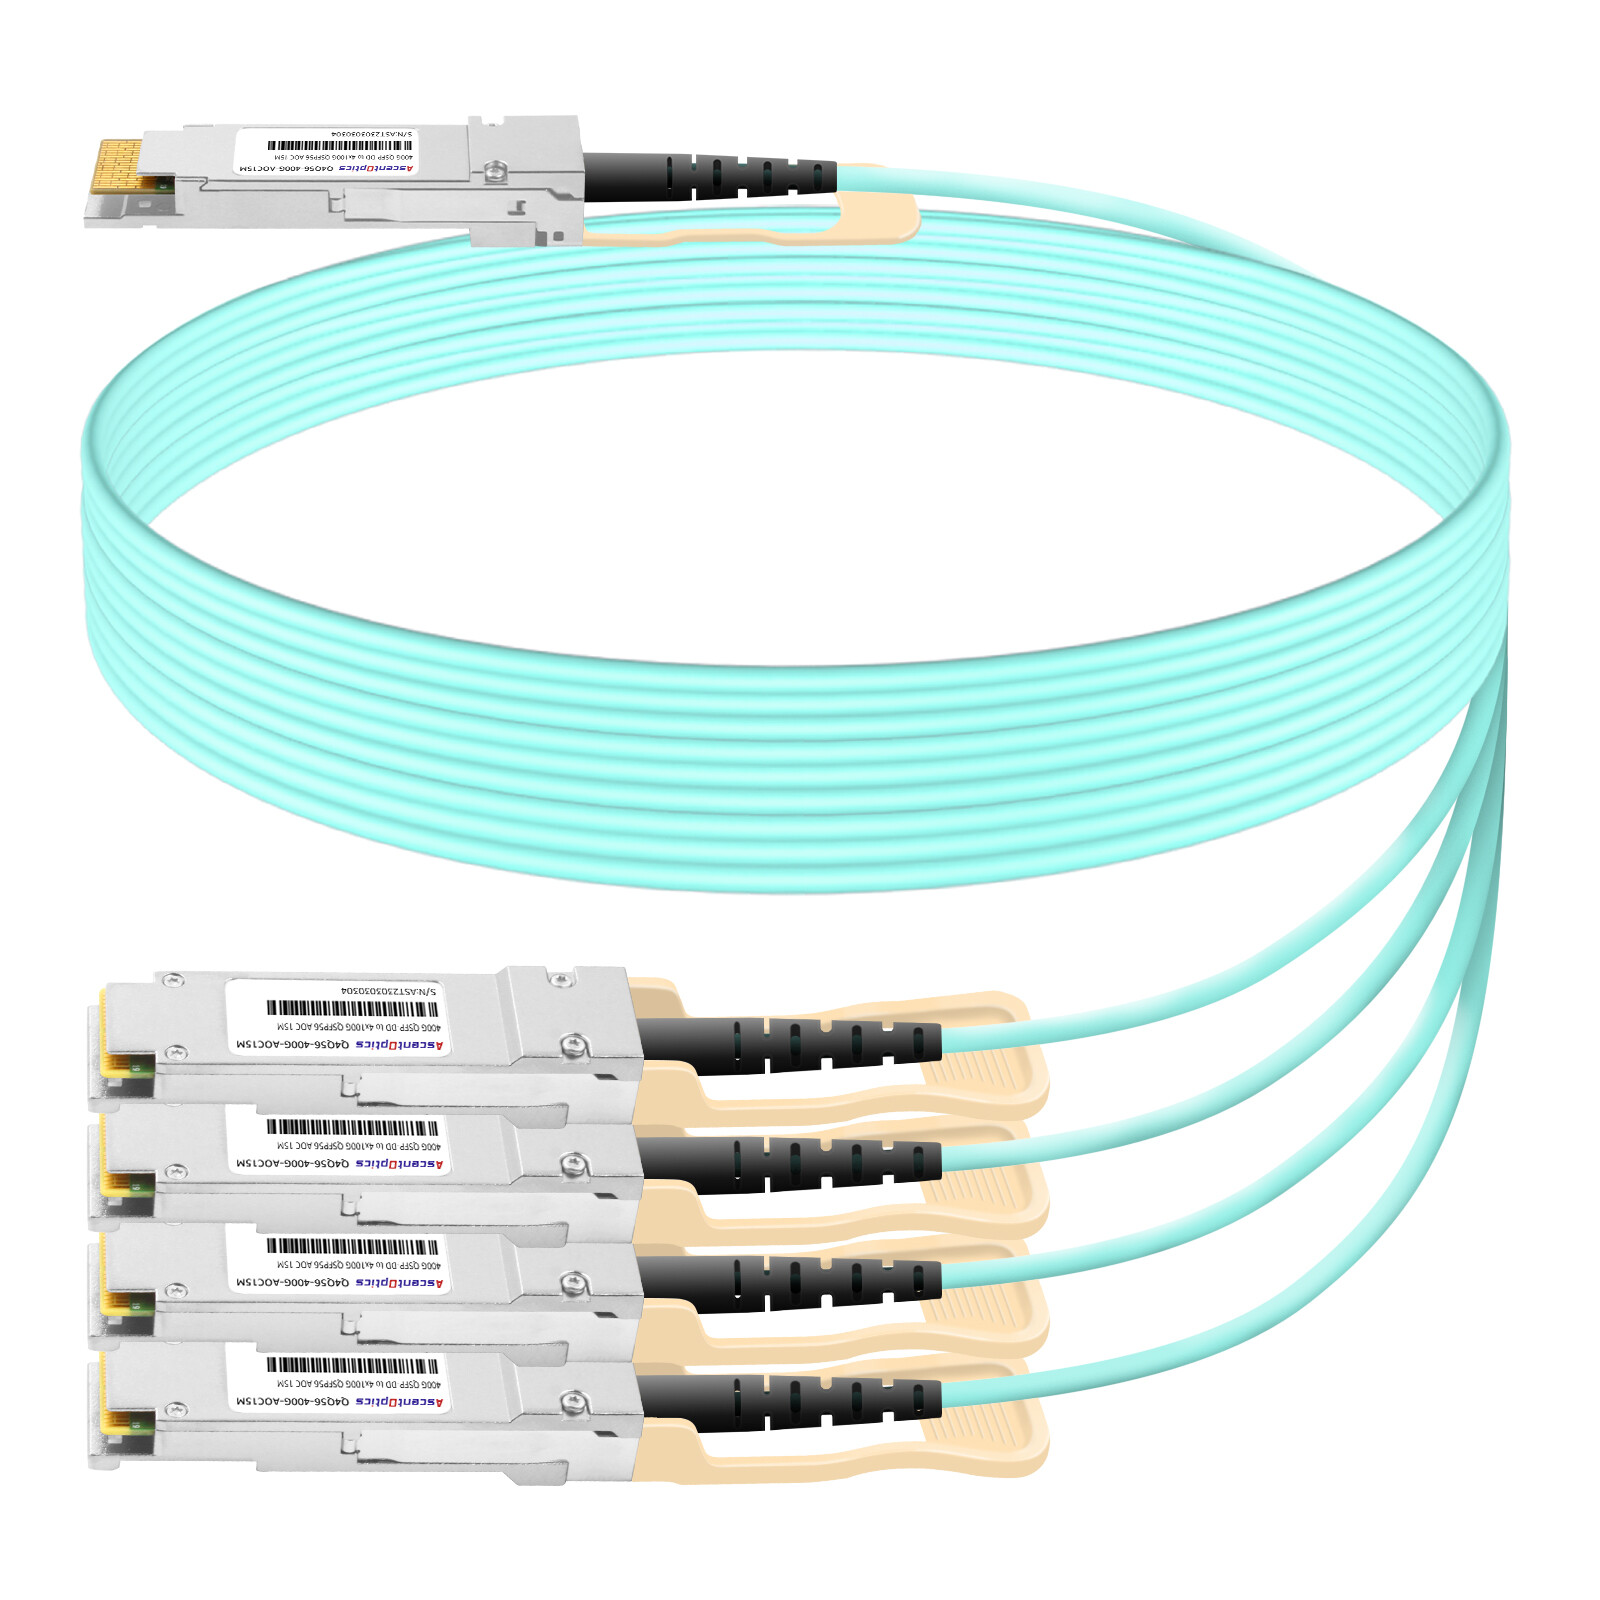 400G QSFP-DD to 4x 100G QSFP56 Breakout AOC Cable,15 Meters